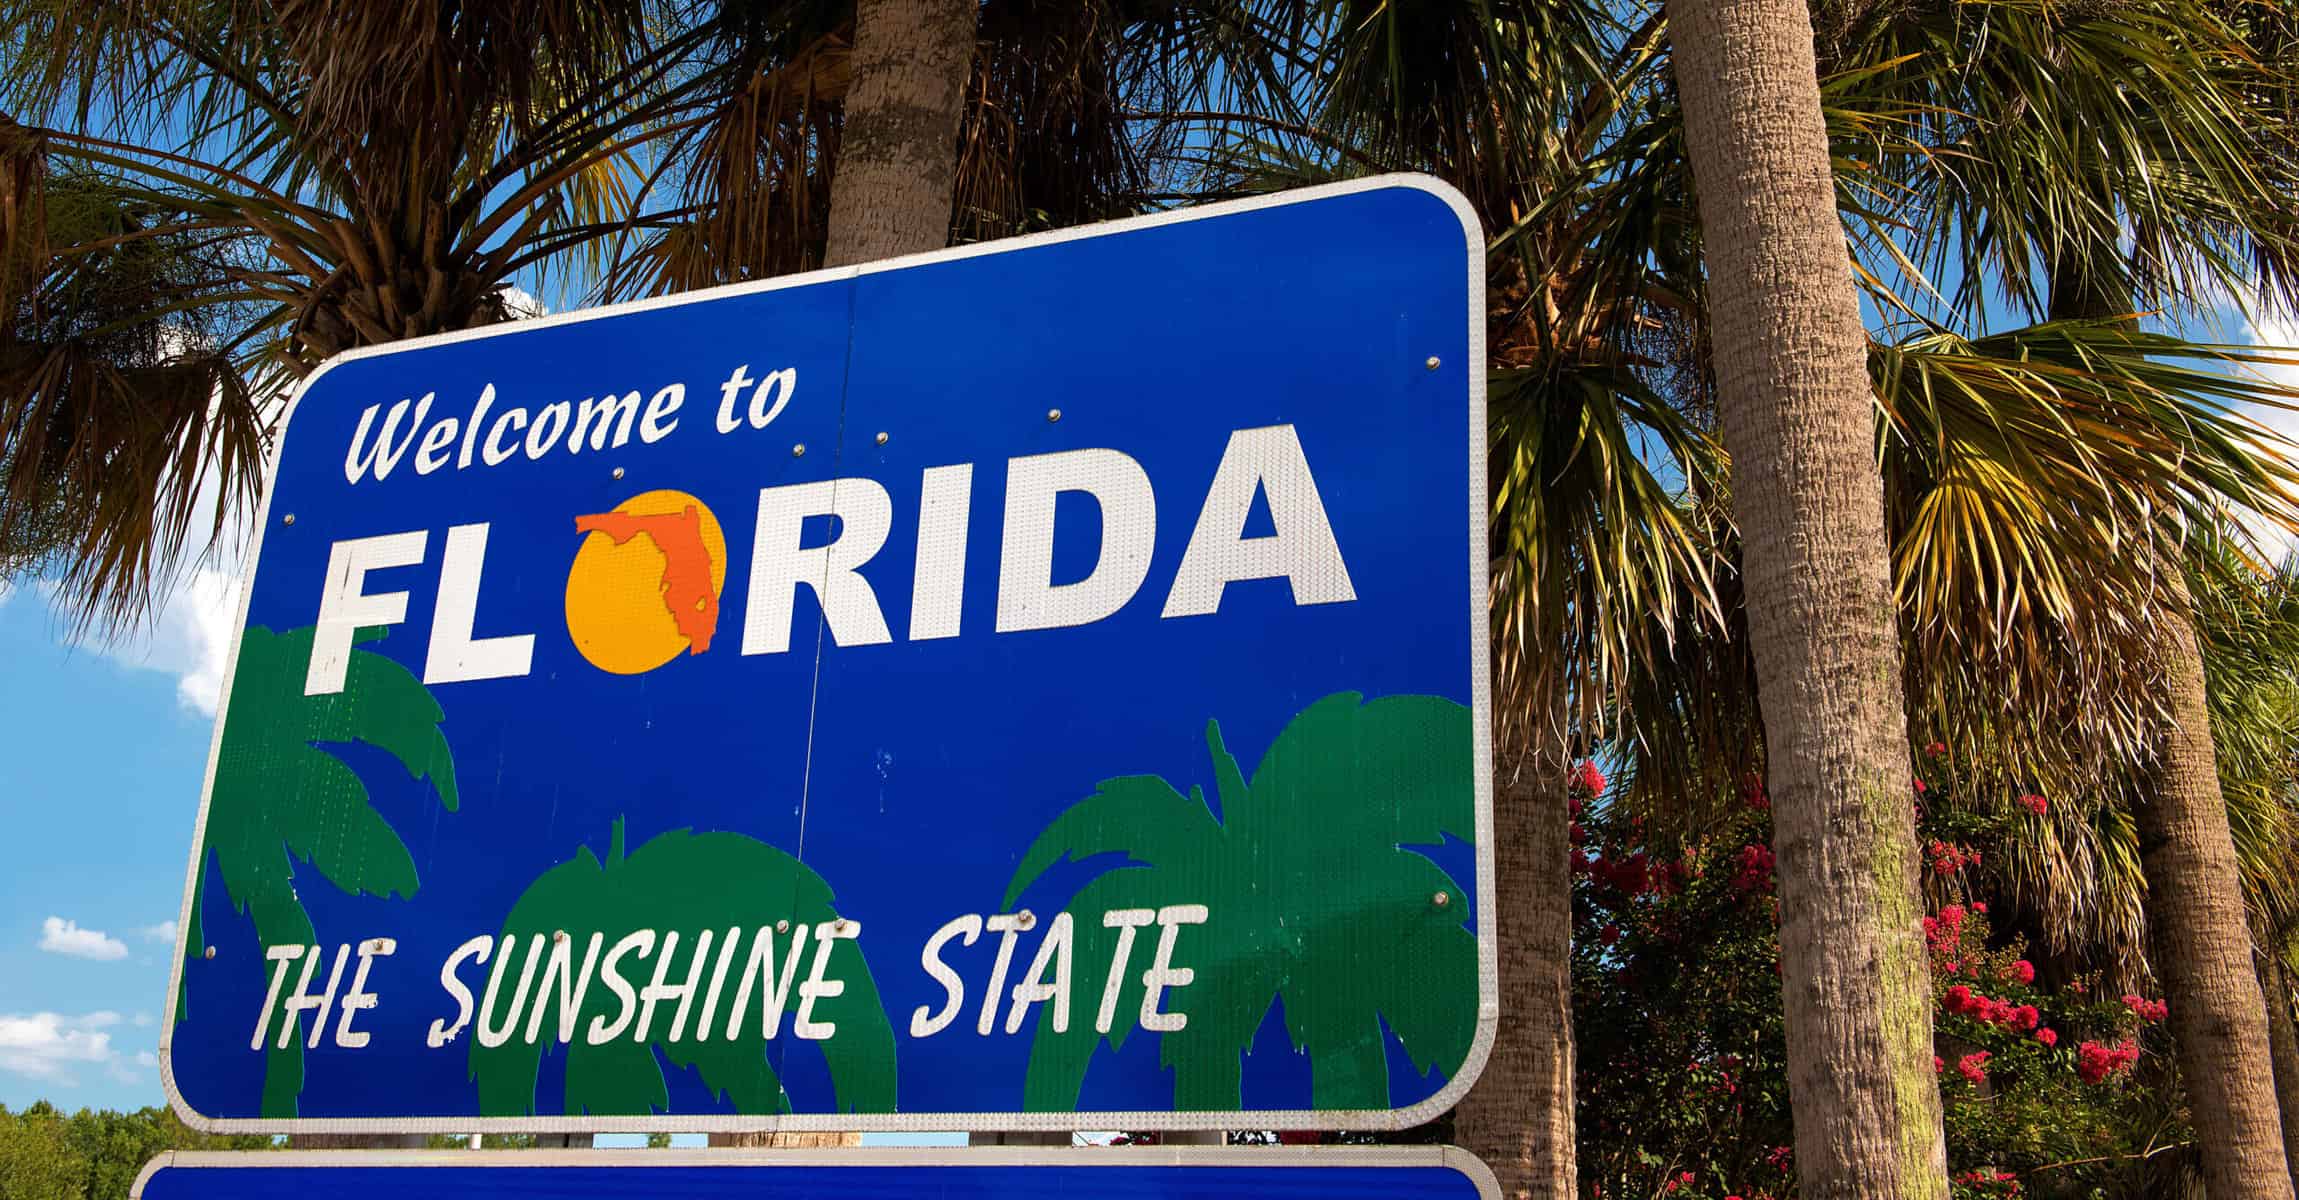 A sign reading "Welcome to Florida: The Sunshine State"